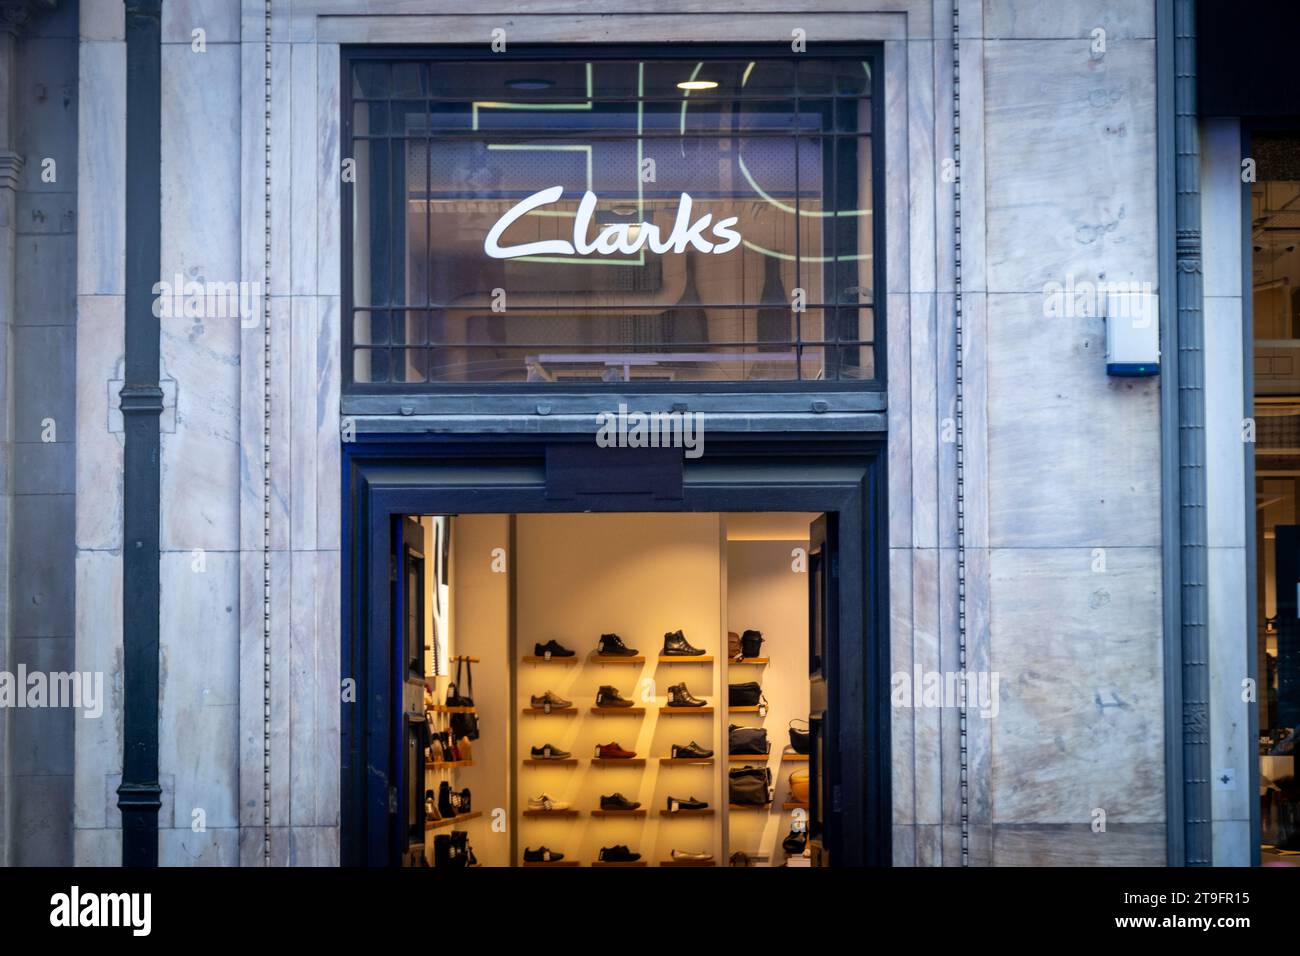 A Clarks shoe store on Oxford Street, central London Stock Photo - Alamy